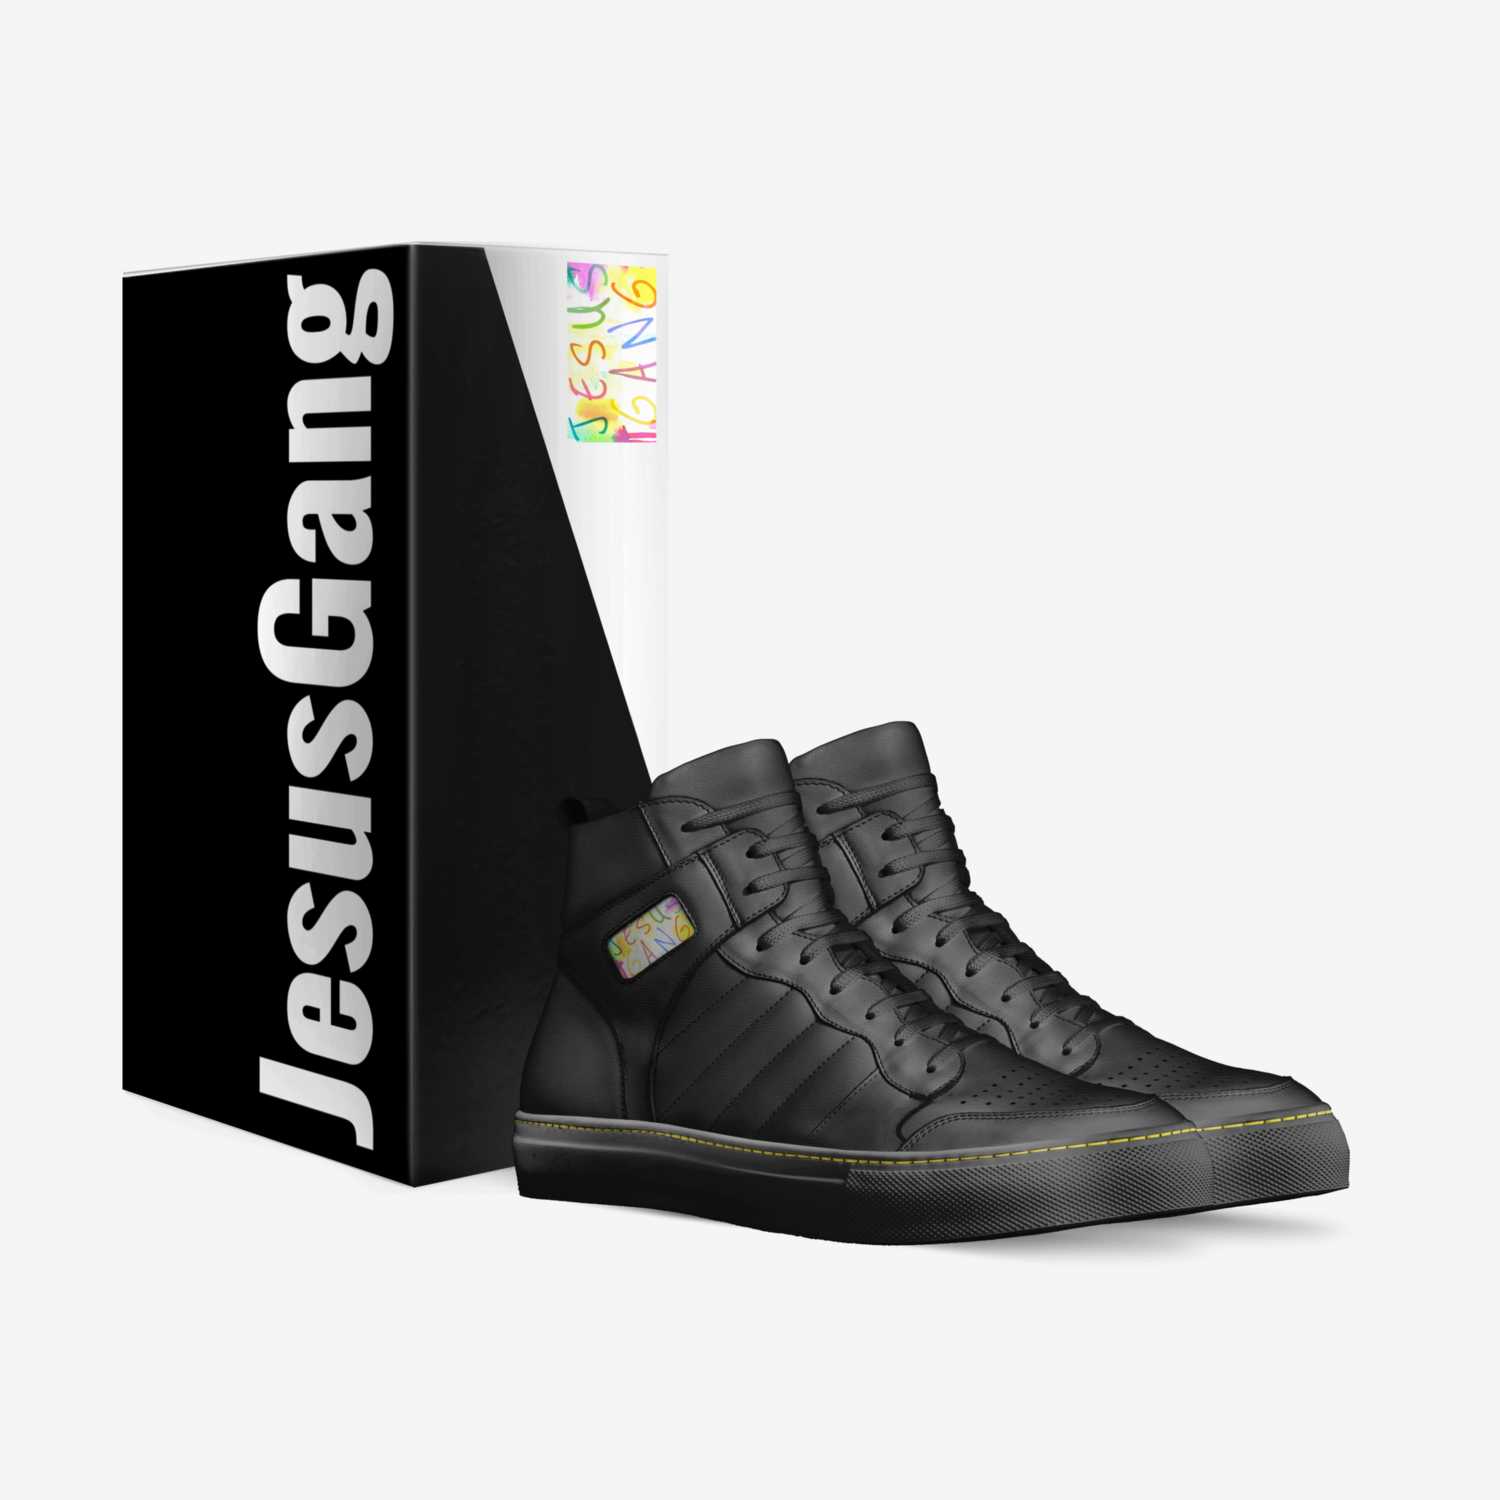 JesusGang Blackout custom made in Italy shoes by Lumont Deshield | Box view